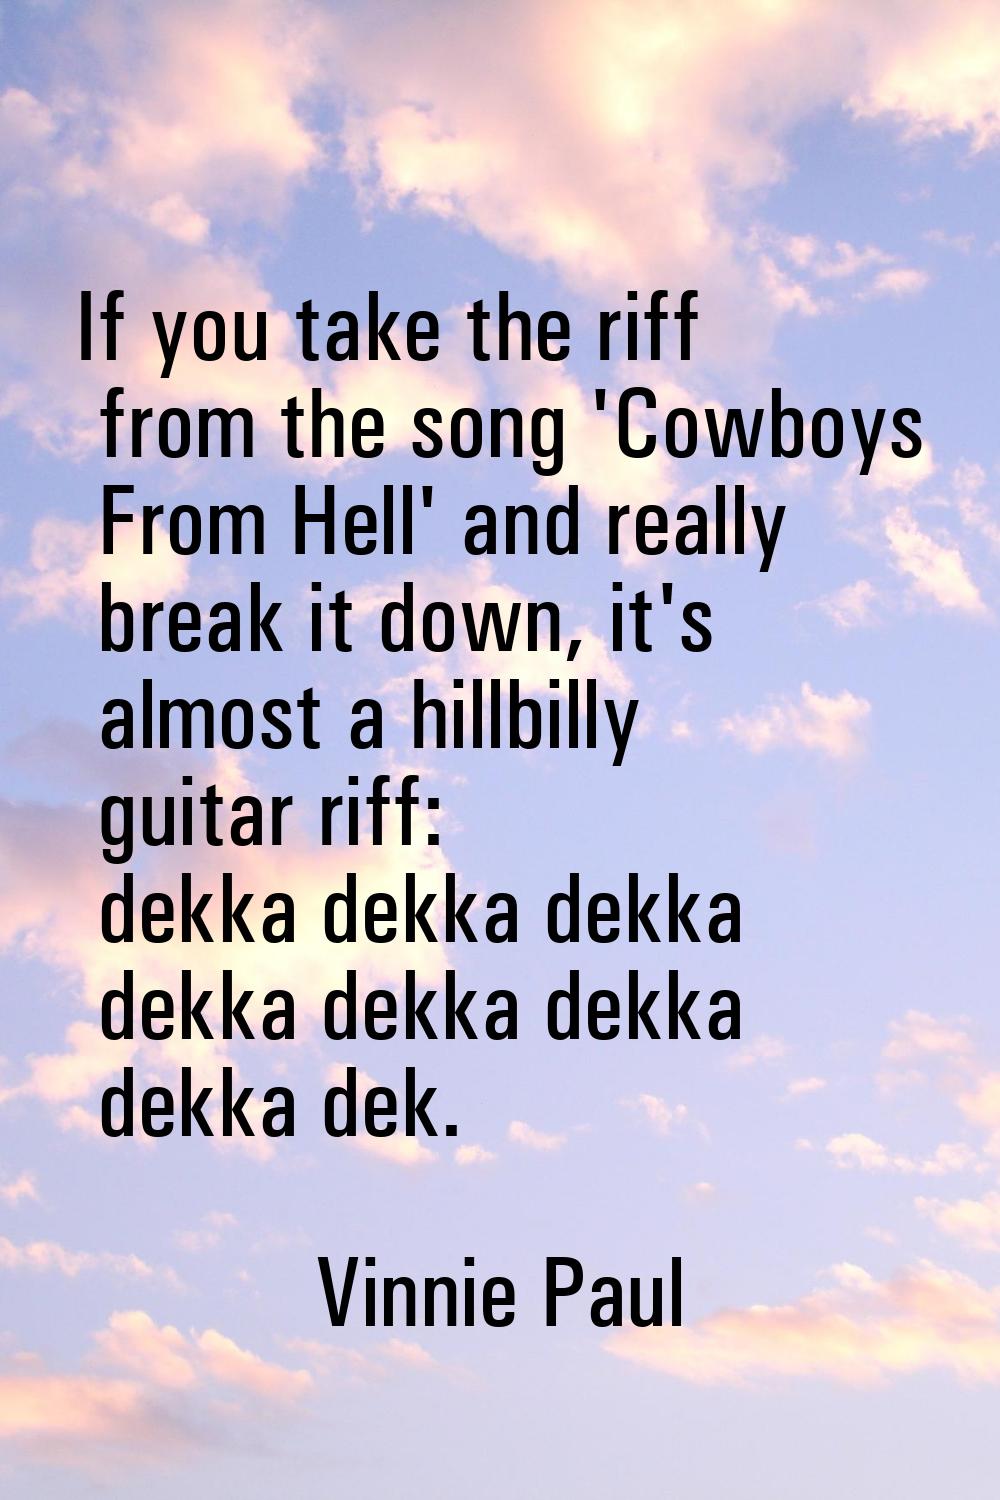 If you take the riff from the song 'Cowboys From Hell' and really break it down, it's almost a hill